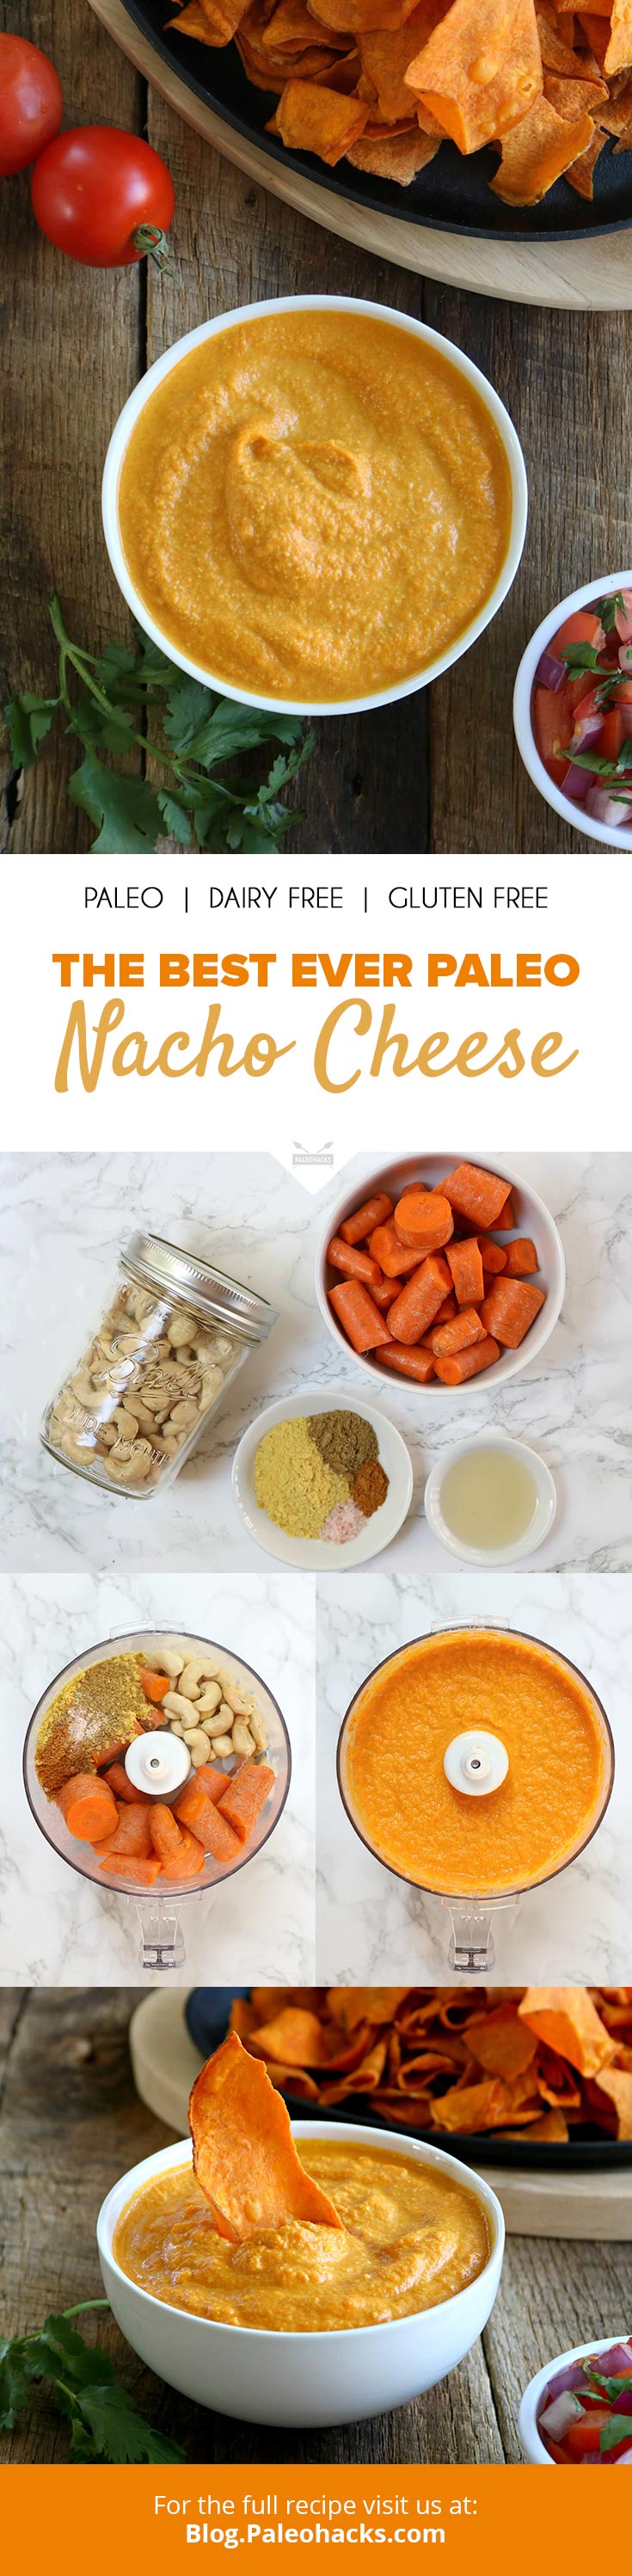 Drizzle this creamy nacho cheese sauce over everything from tacos to veggie chips! Include action shot with crispy sweet potato chip!